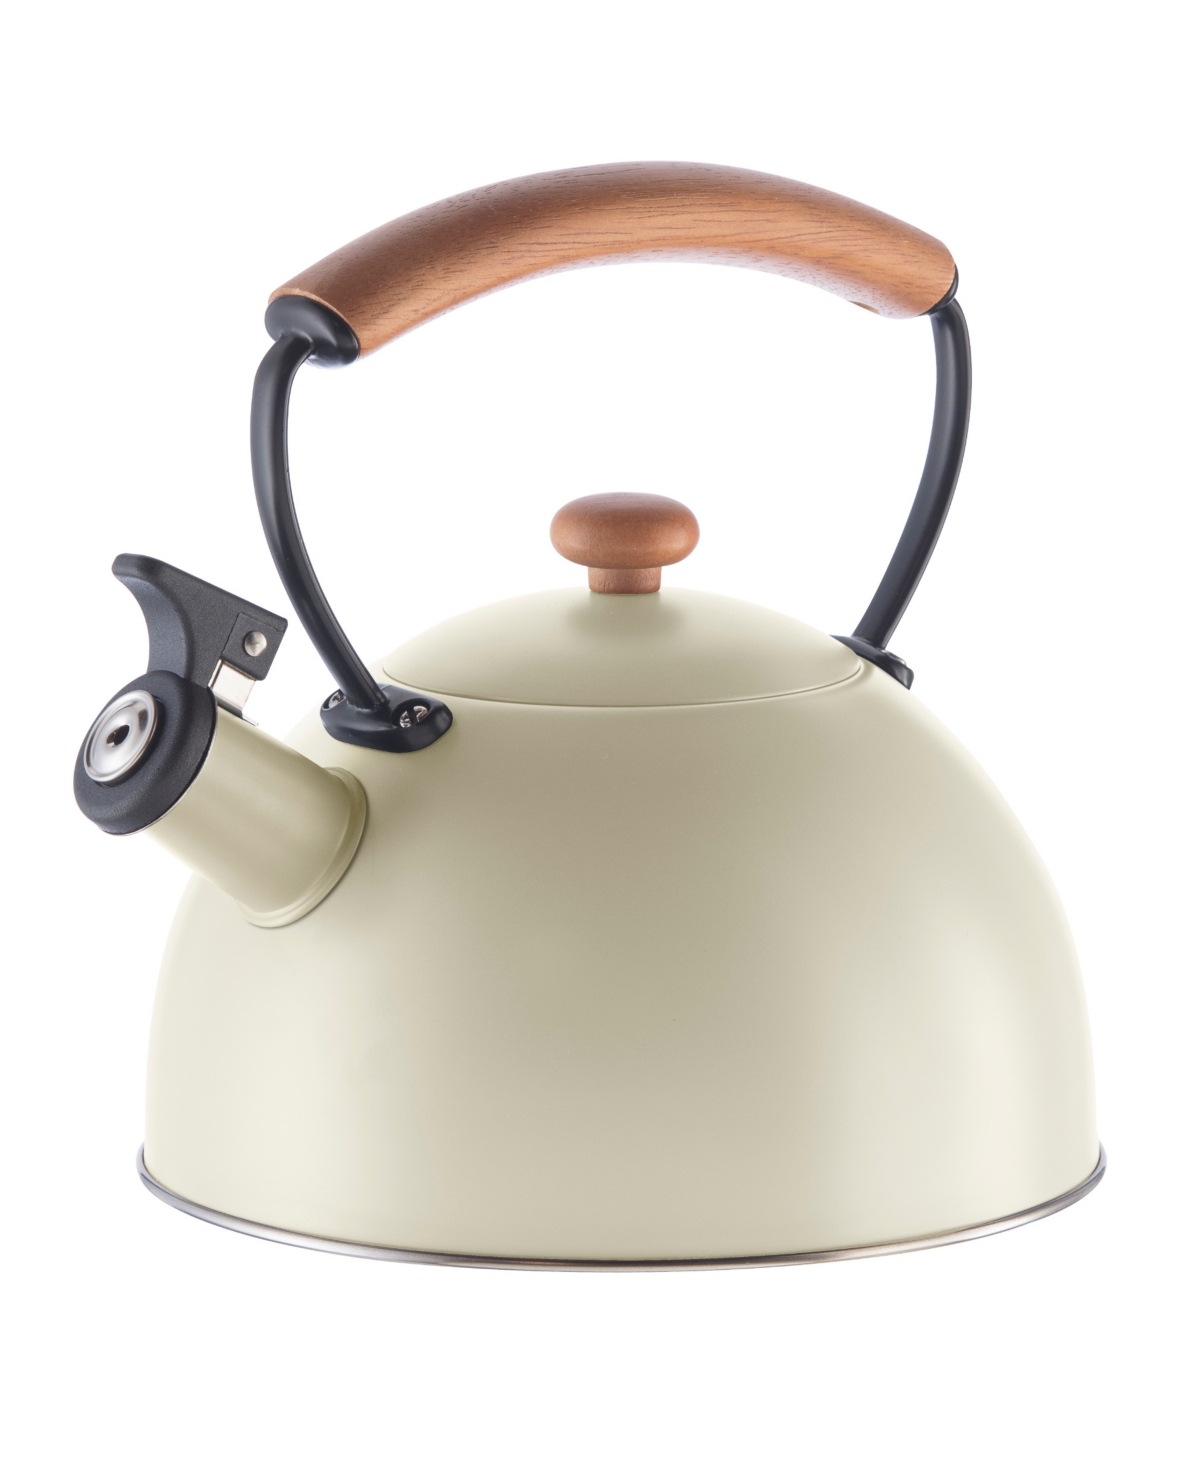 Oggi 2.5 Litre Whistling Tea Kettle With Wood Handle In Warm Gray